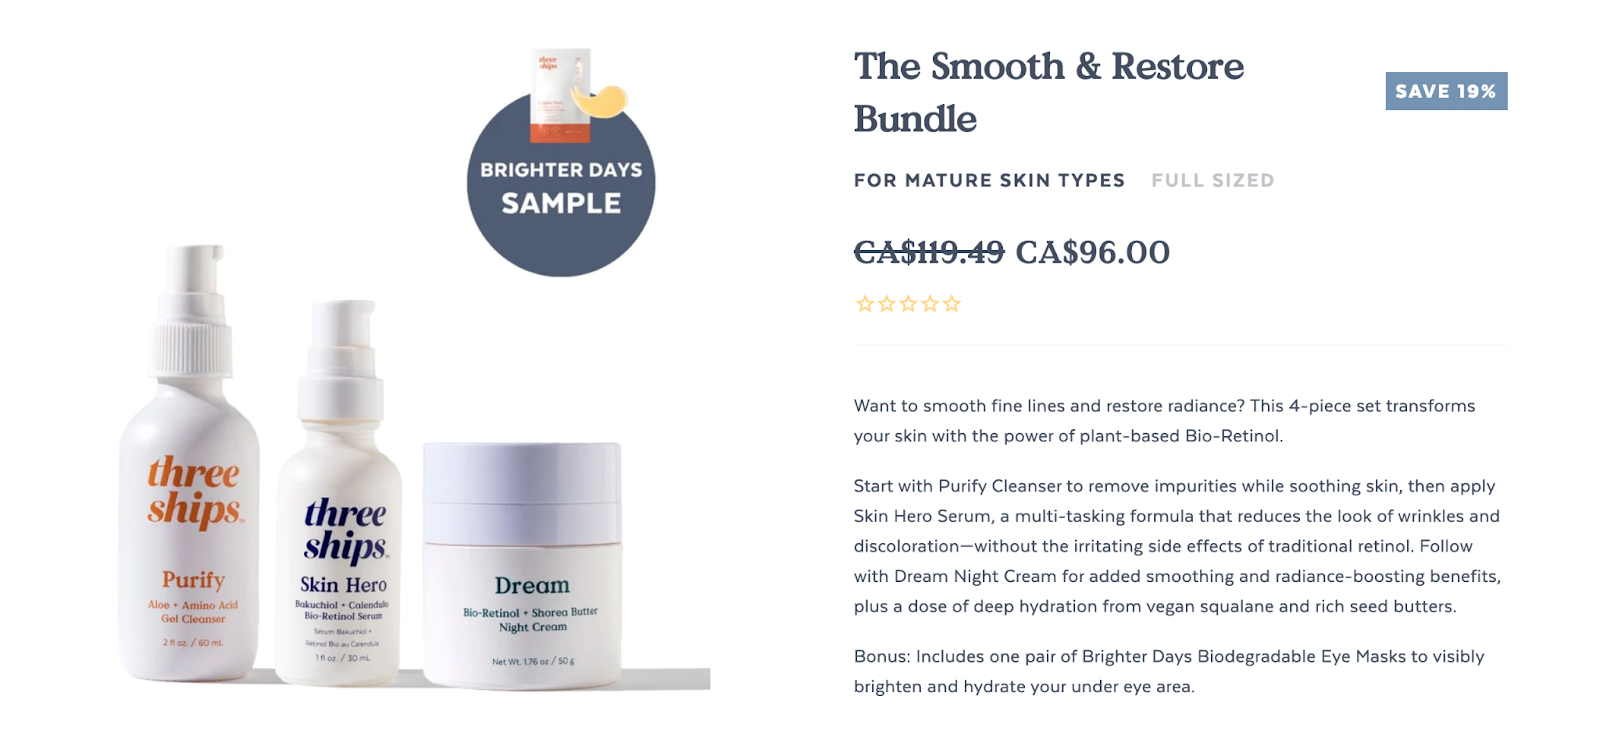 Three Ships' Smooth and Restore Bundle, for mature skin types. It includes a cleanser, serum, and moisturizer. The bundle is on sale for $96.00, and it shows customers how they're saving 19% by purchasing the bundle instead of each item individually.